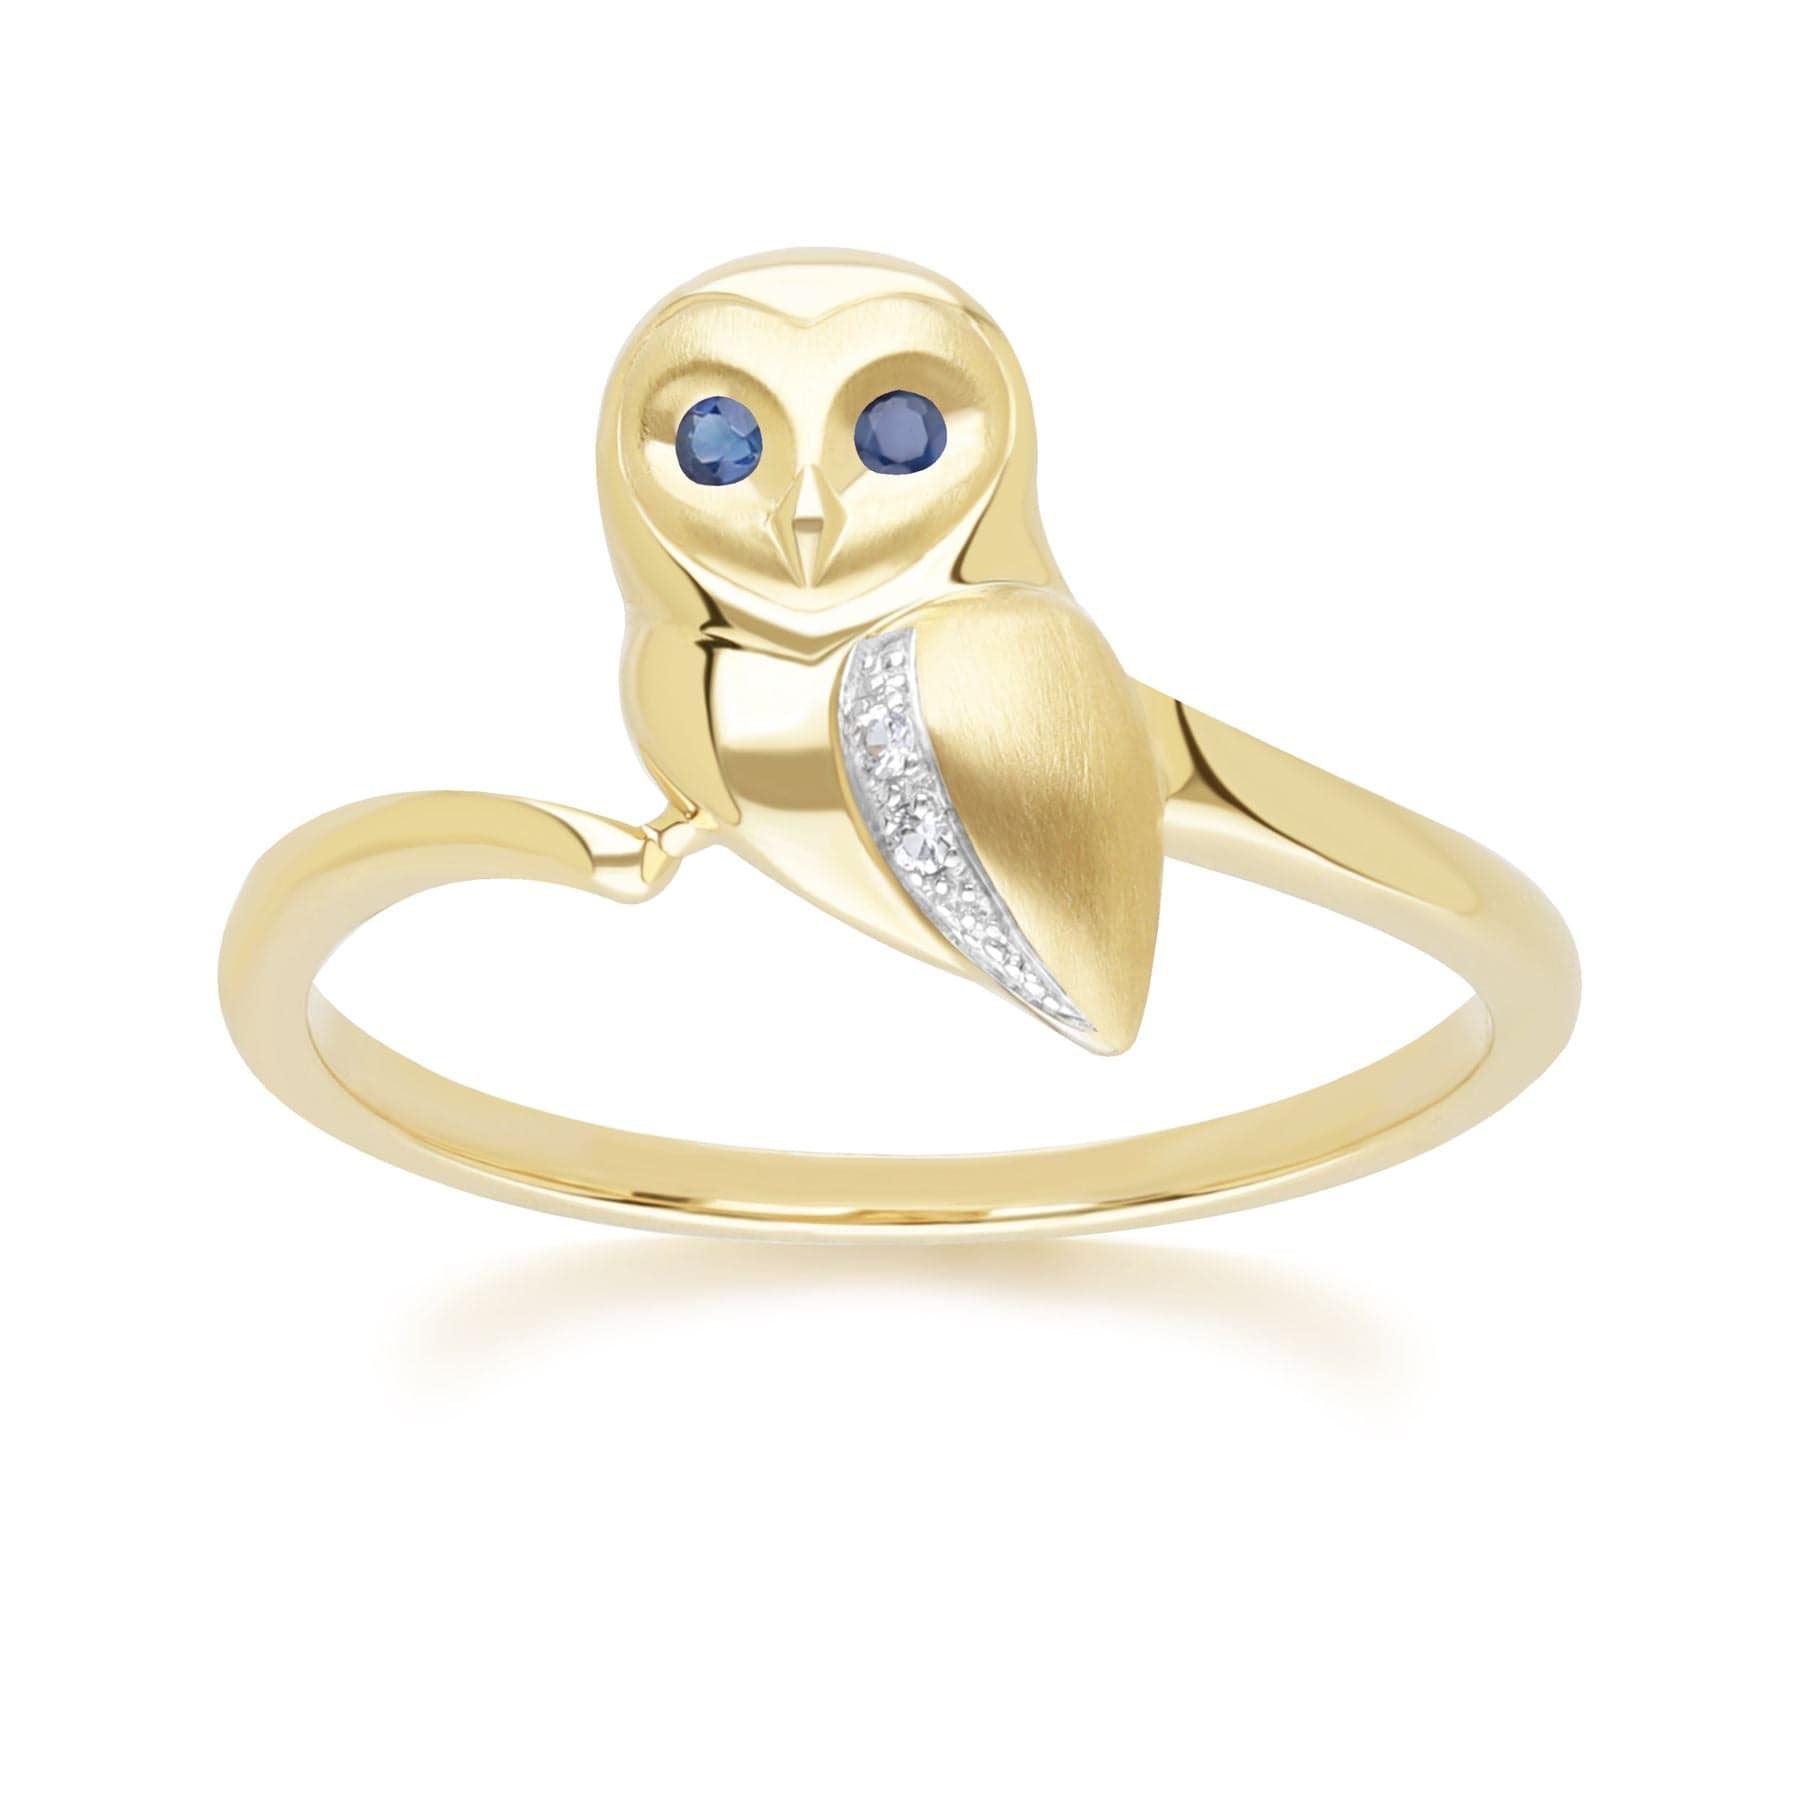 135R2103039 Gardenia Sapphire and White Sapphire Owl Ring in 9ct Yellow Gold Front